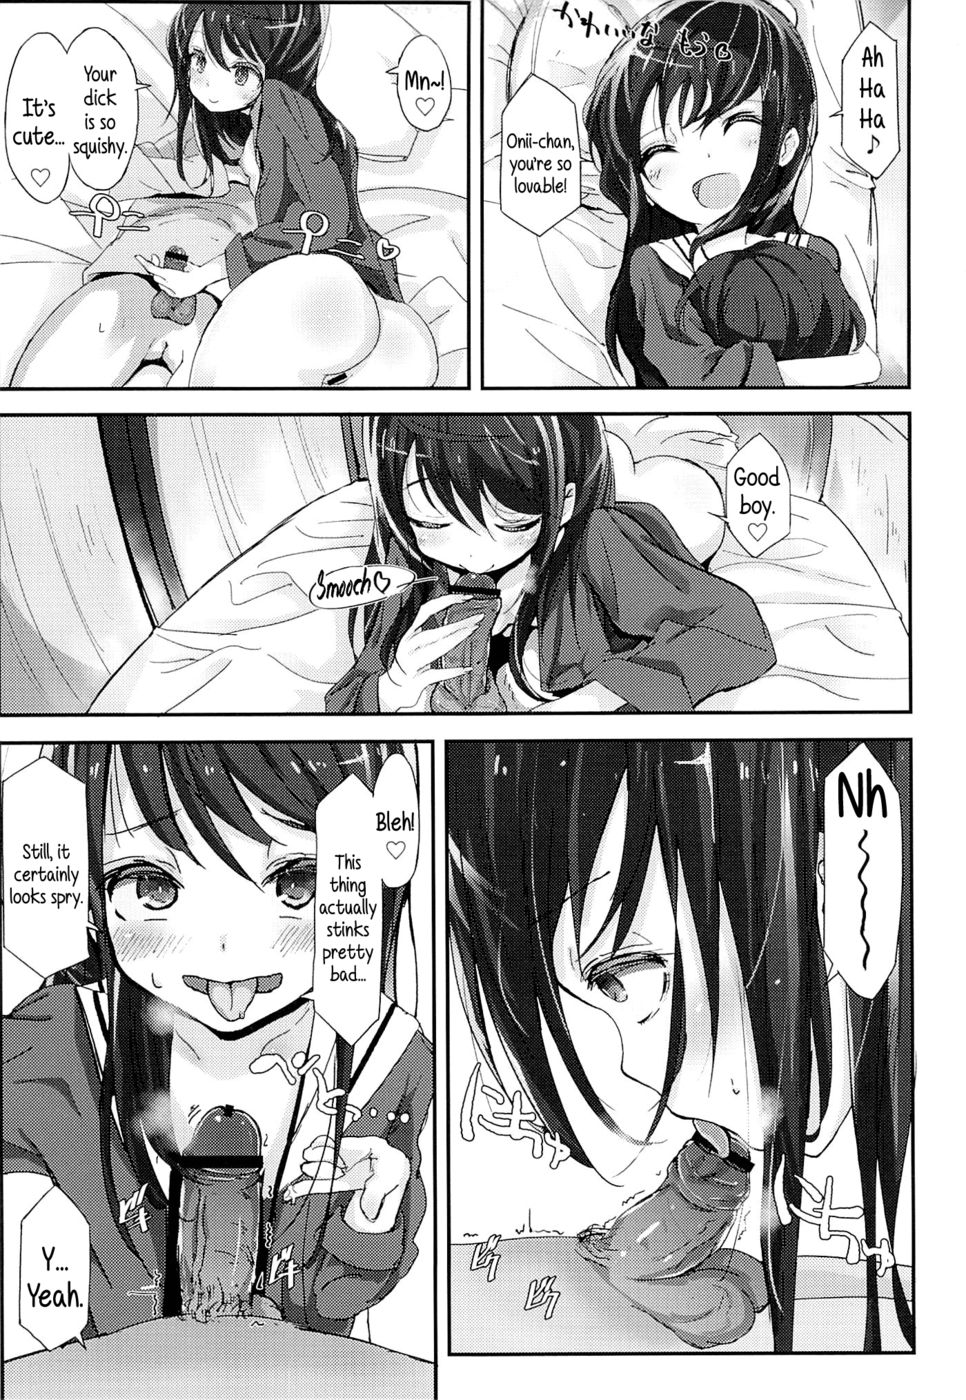 Hentai Manga Comic-Beyond the mouth of the uterus lies Onii-chan's demise-Read-12